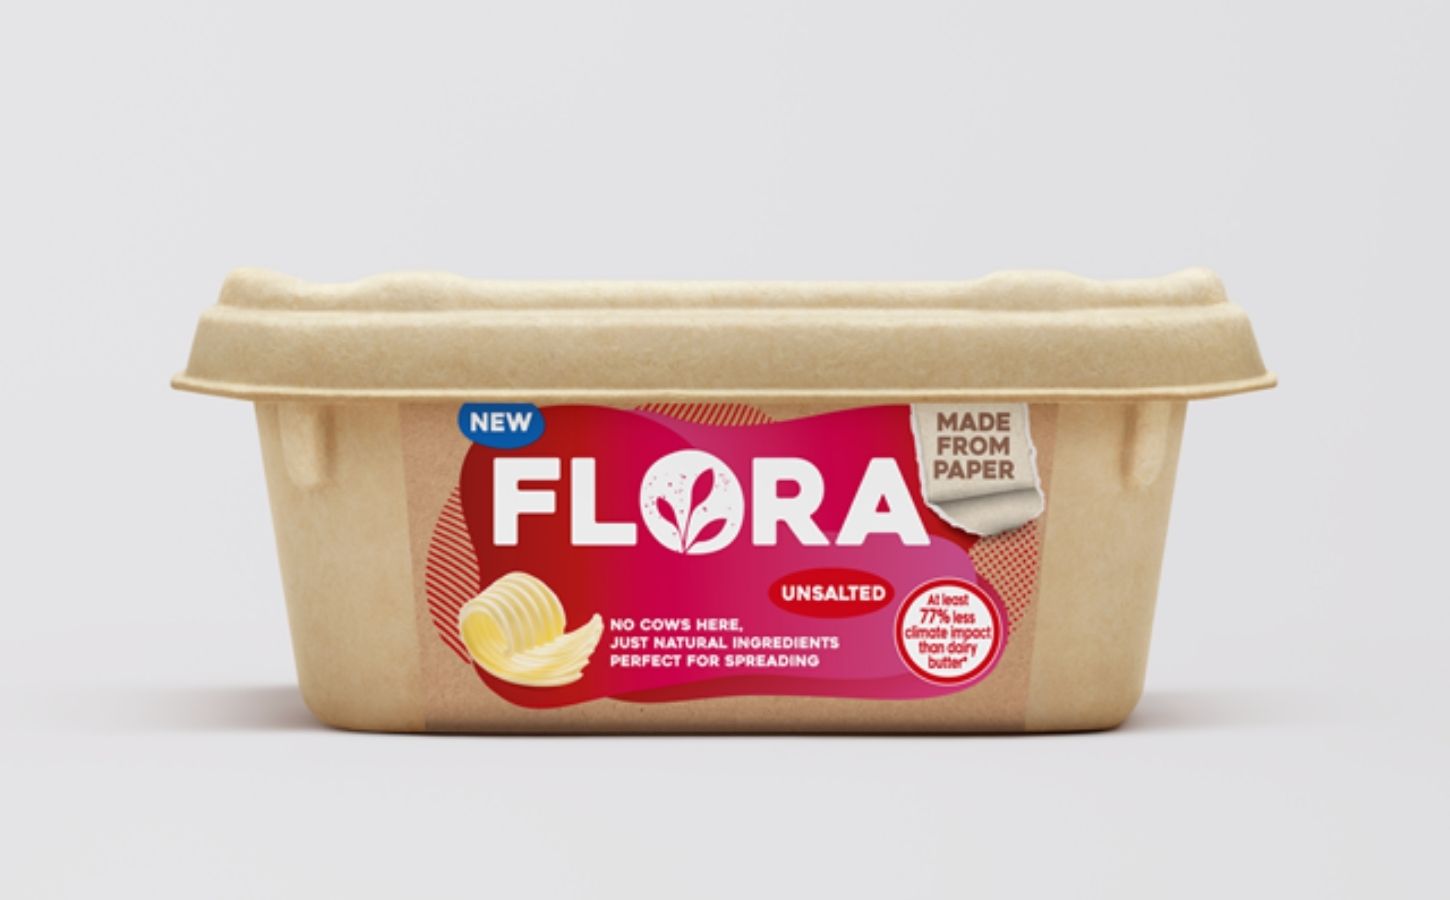 Flora spread will be sold in paper packaging